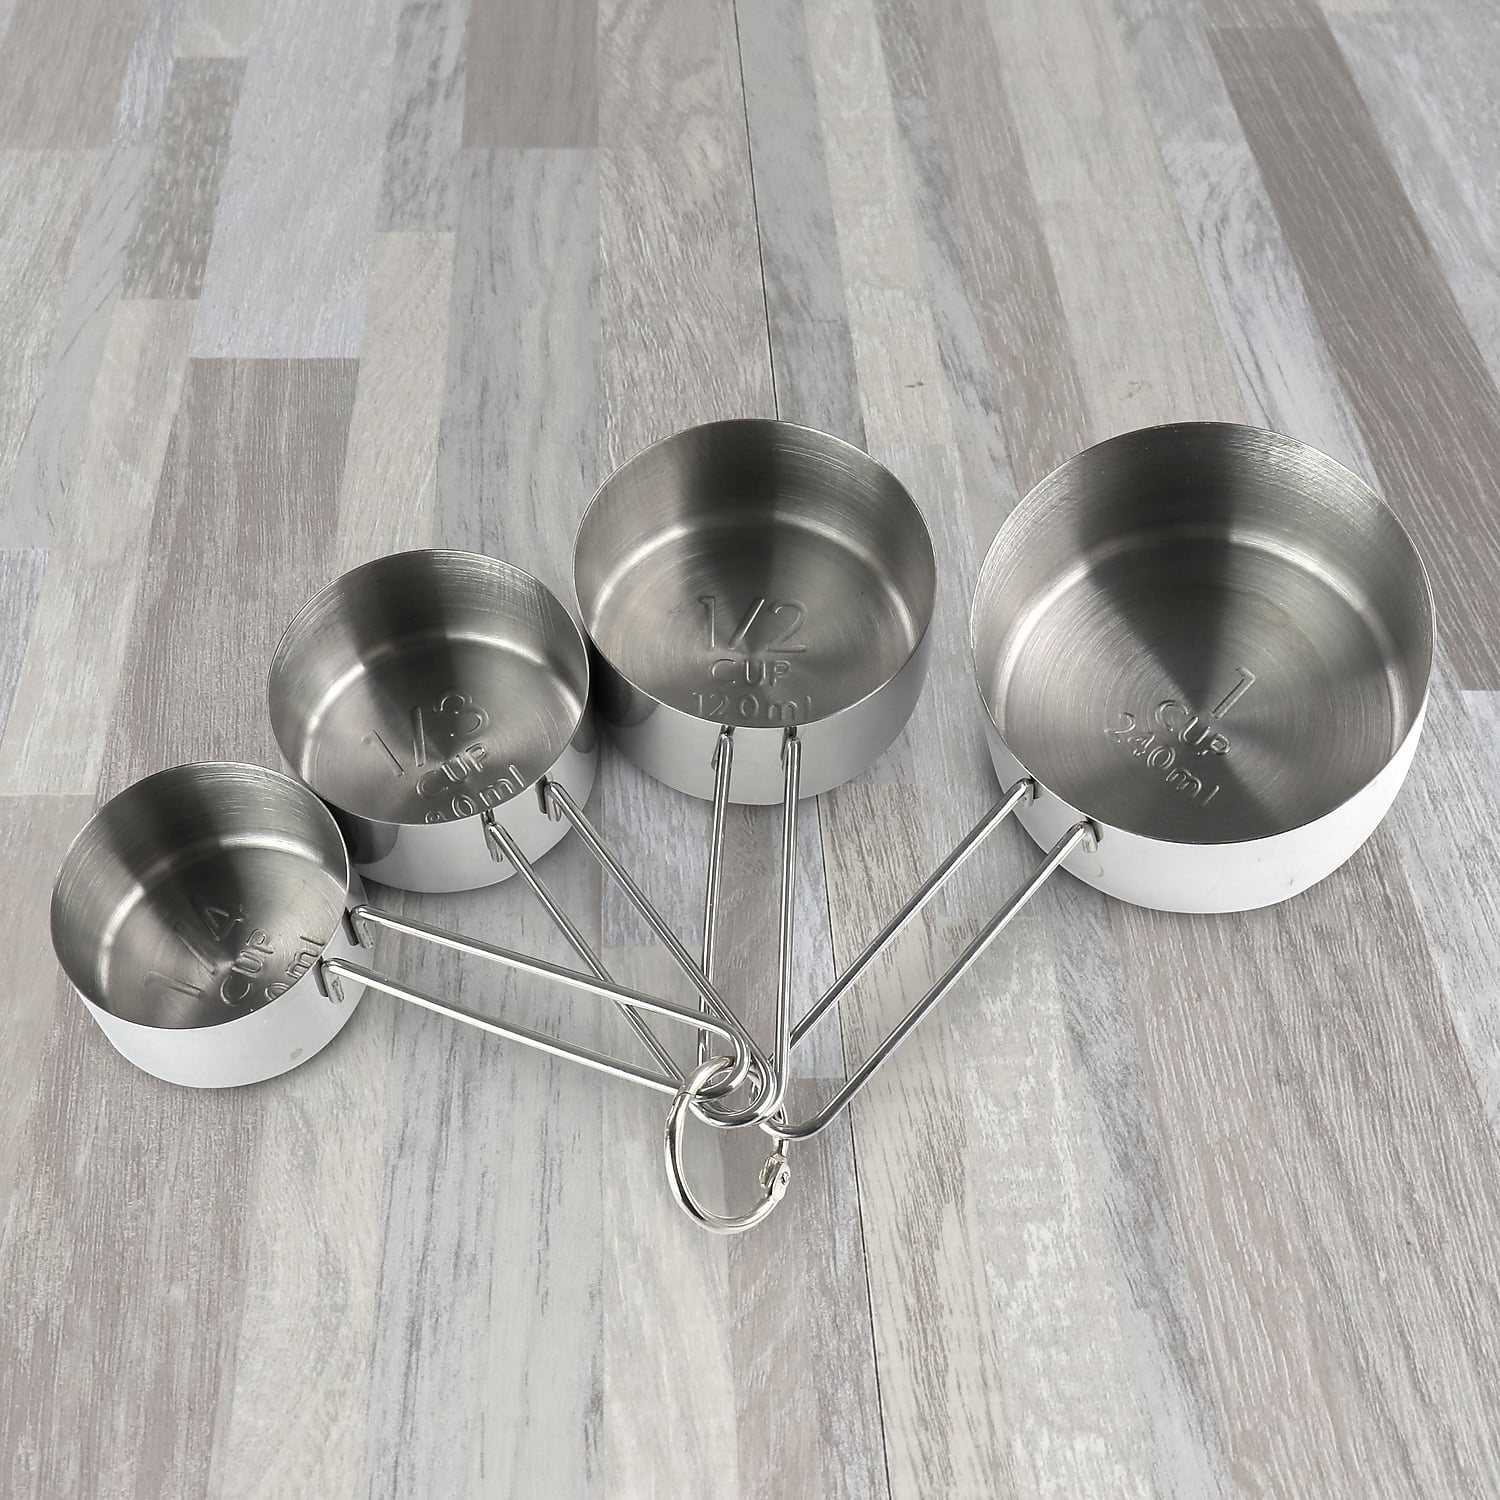 Martha Stewart Stainless Steel 4-pc. Measuring Cup, Color: St Steel -  JCPenney